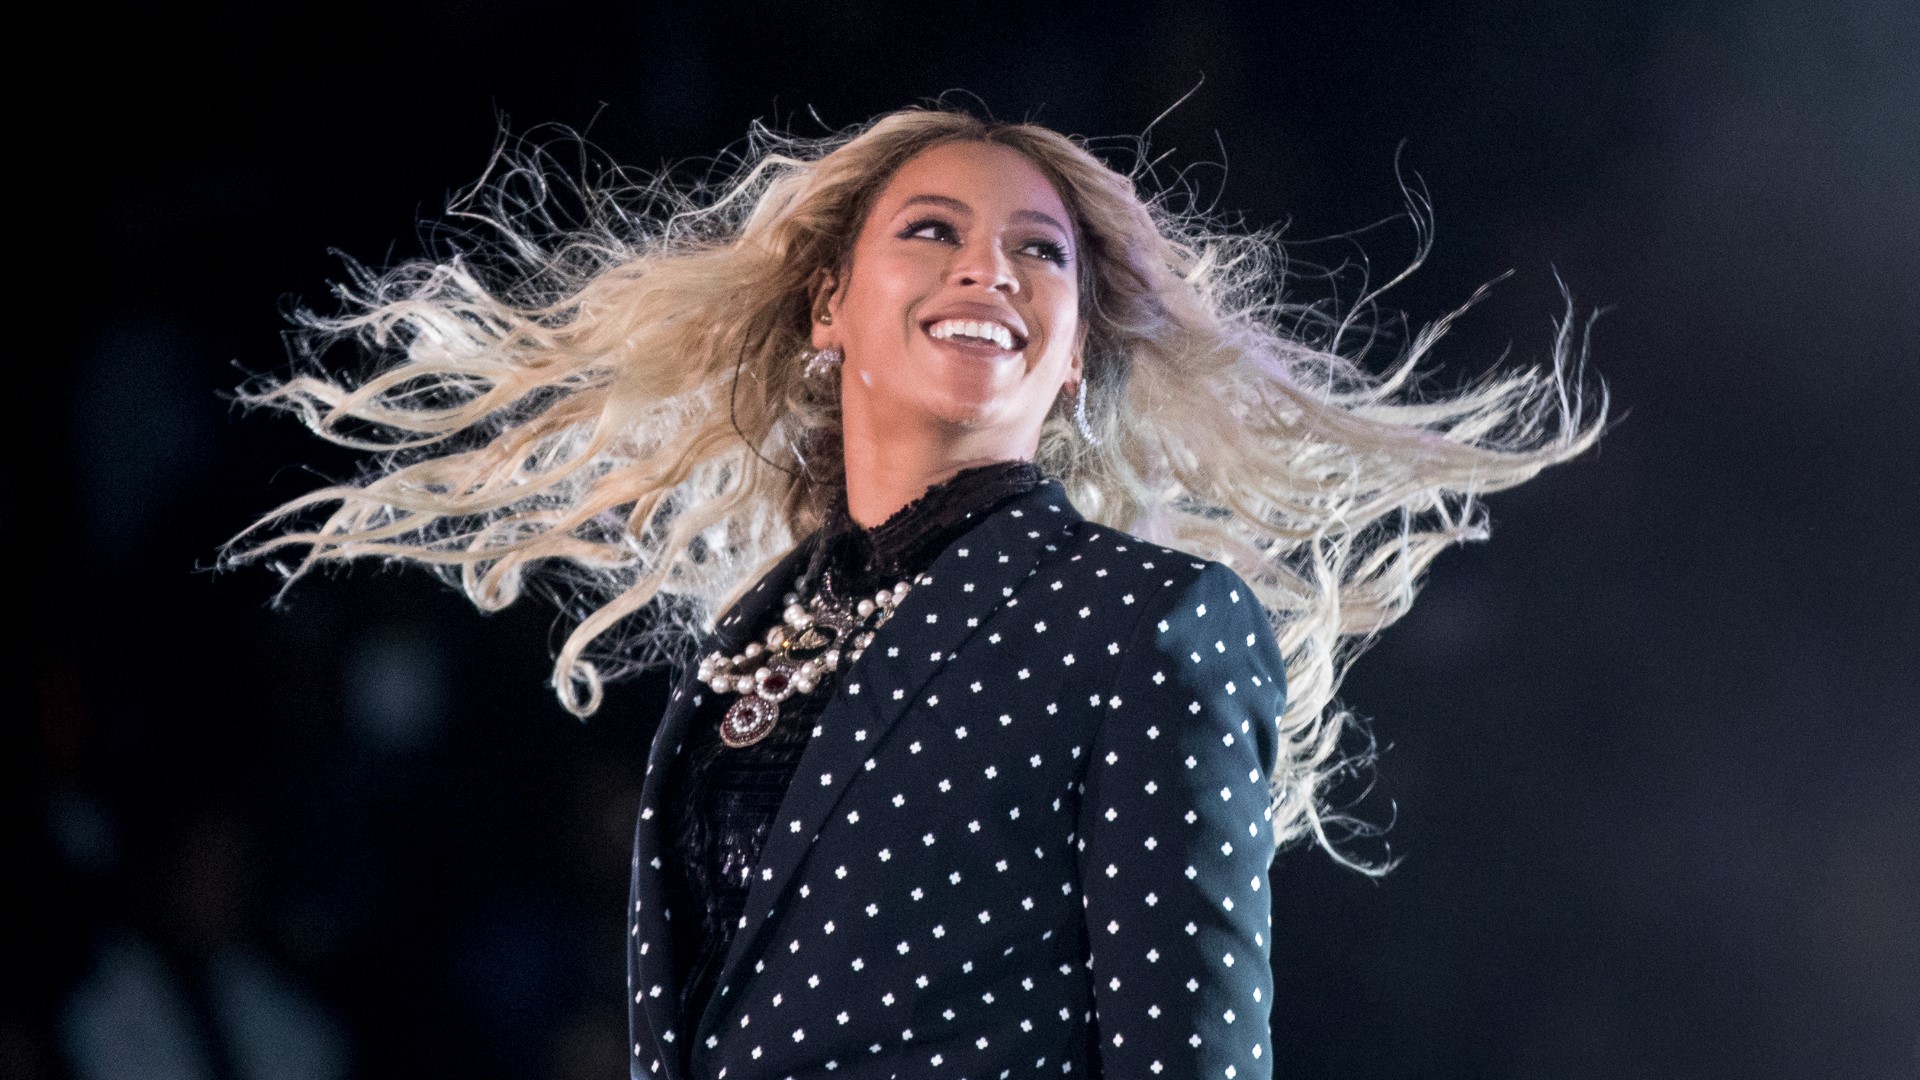 Beyoncé, a Texas native, is no stranger to Country. And Country music is full of Black artists, even if many have been overlooked in the genre's history.